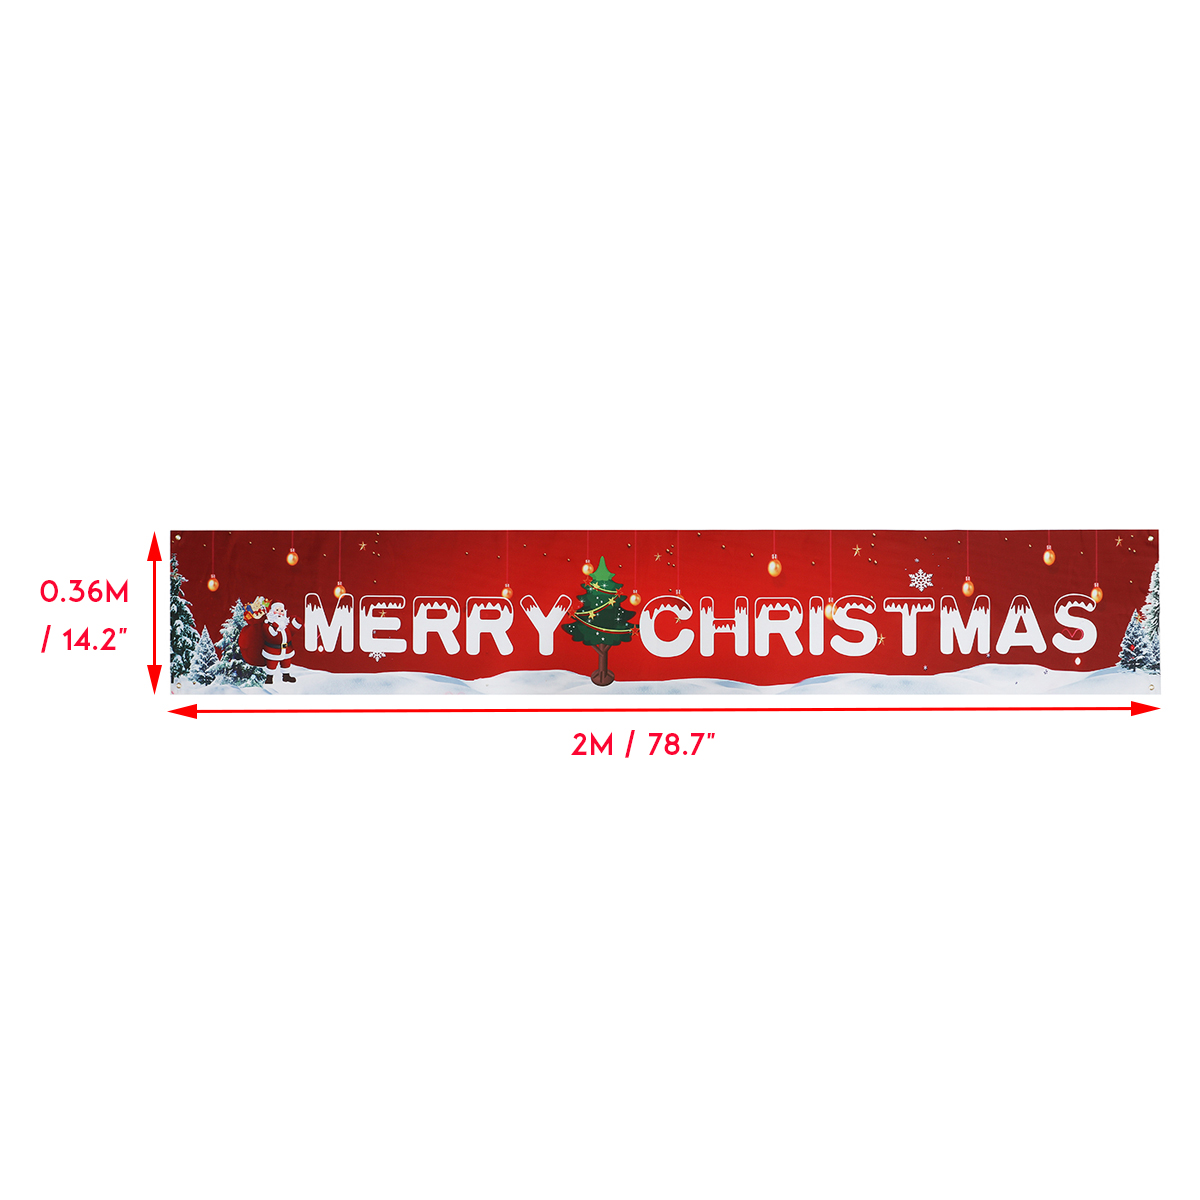 20036cm-Christmas-Banner-Decoration-Polyester-Cloth-Christmas-Halloween-Ornaments-for-Outside-Happy--1789566-7